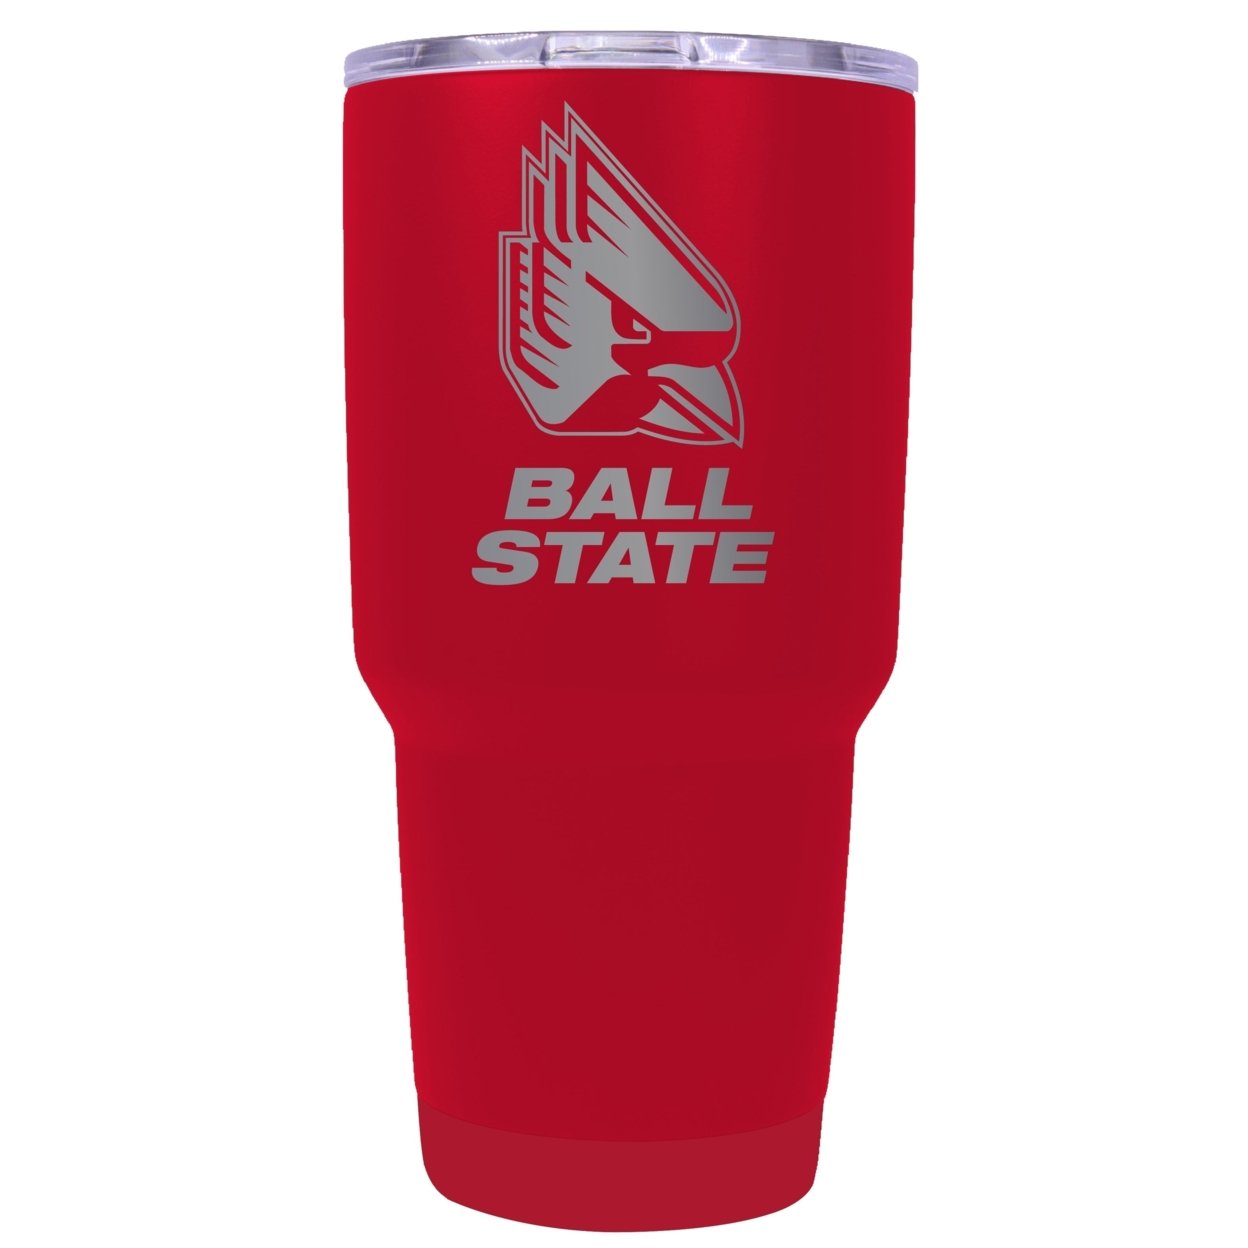 Ball State University 24 Oz Laser Engraved Stainless Steel Insulated Tumbler - Choose Your Color.